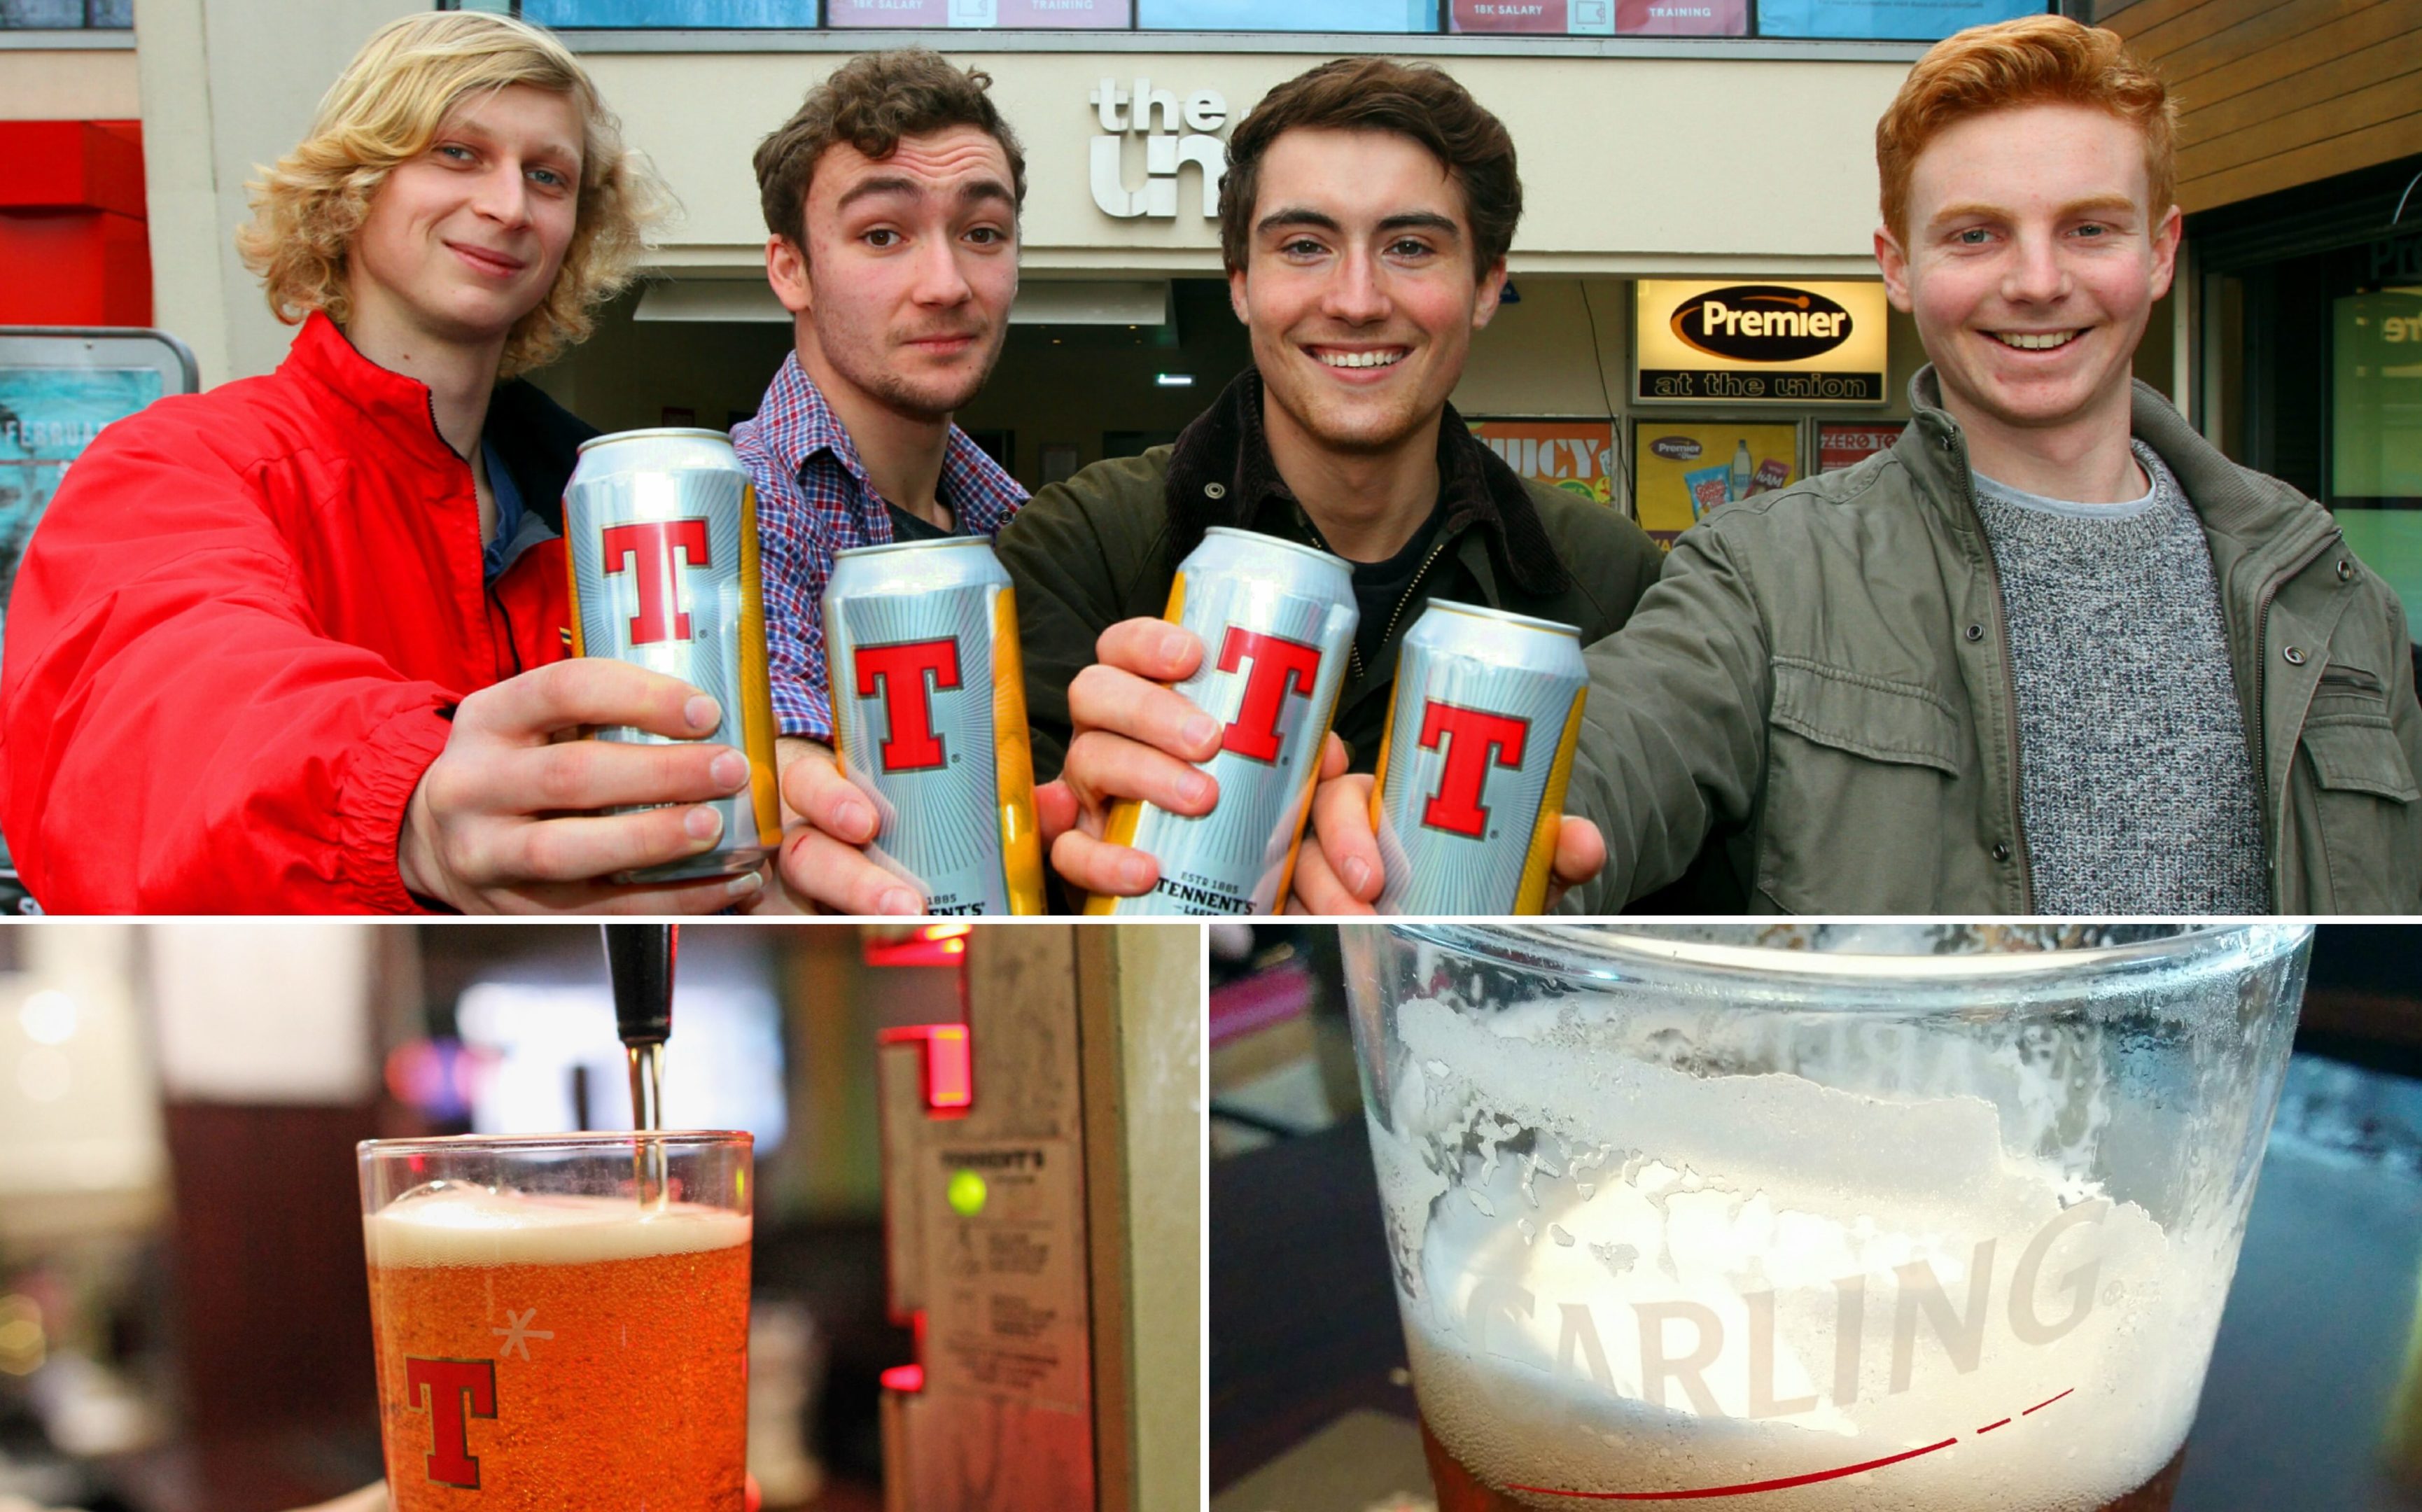 The University Of Dundee Tennent's Lager Appreciation Society are fighting to bring the Scots brew back to DUSA The Union